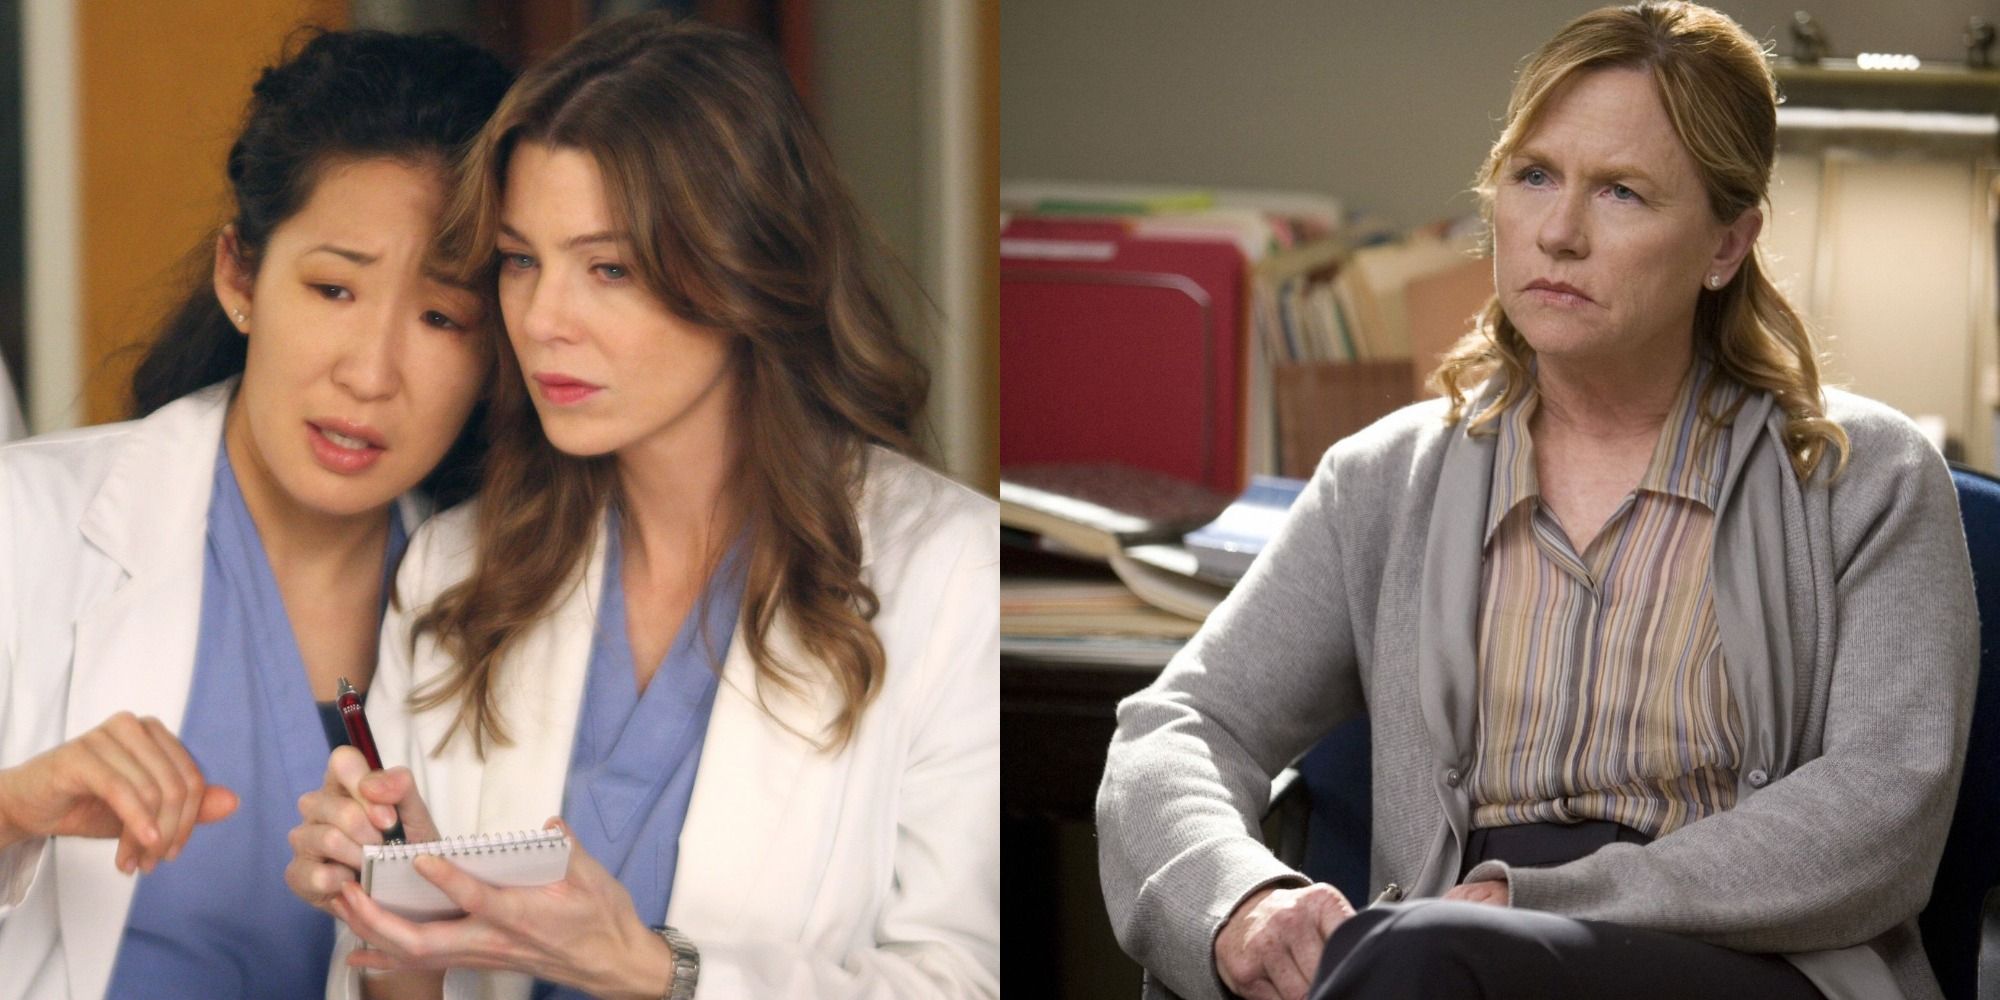 Split image showing Meredith and Cristina seeing a phone, and Katharine Wyatt sitting down